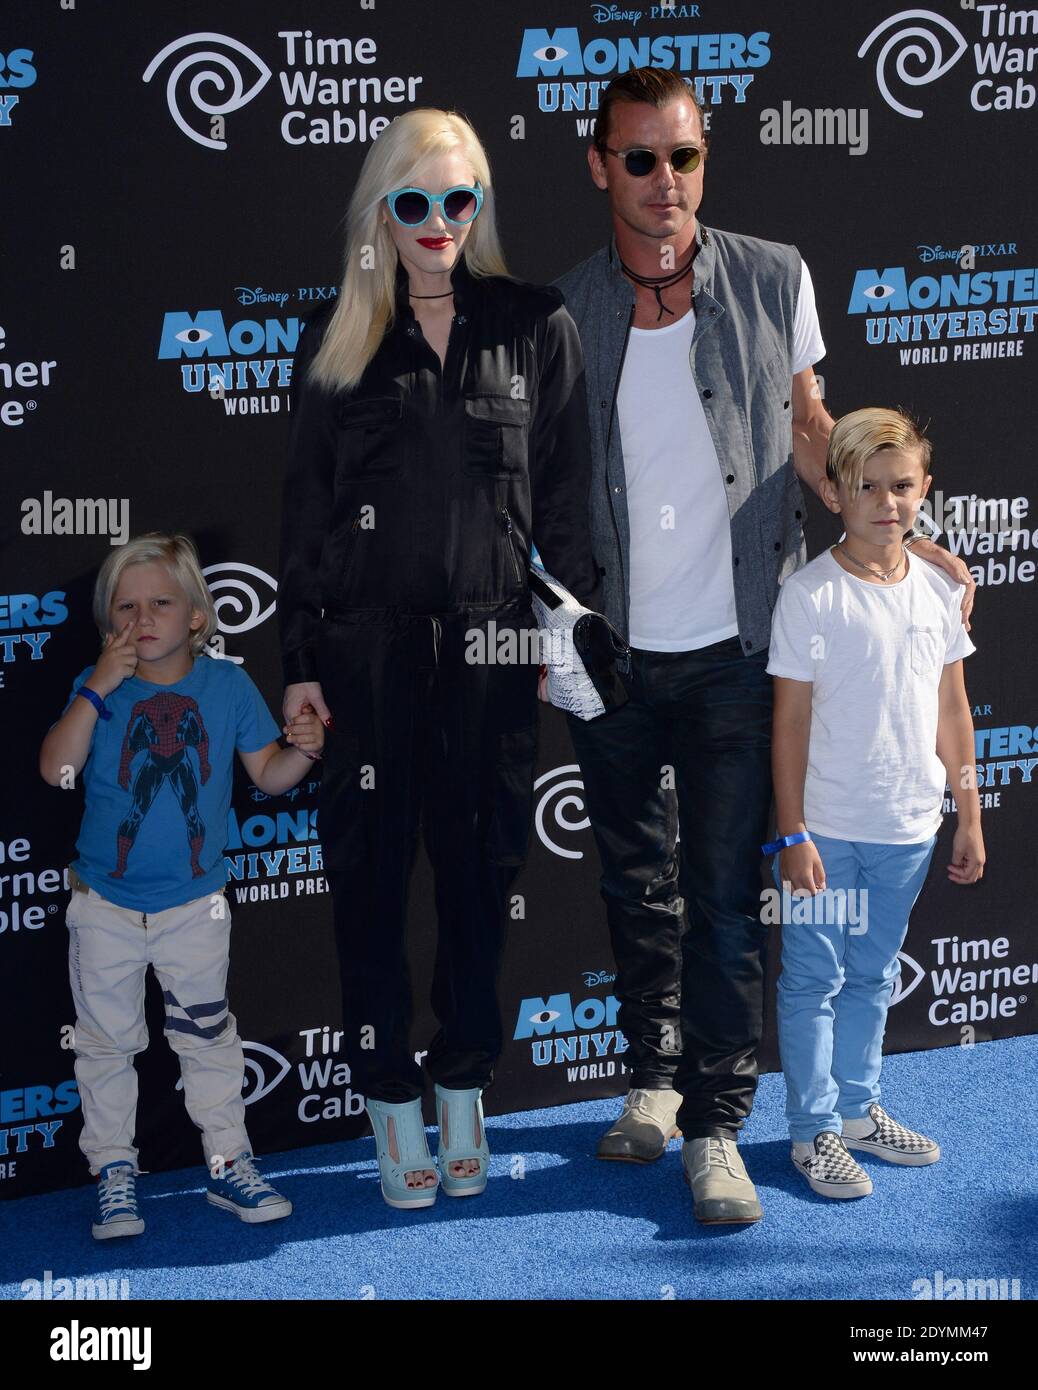 Zuma Nesta Rock Rossdale, Gwen Stefani, Kingston Rossdale and Gavin Rossdale attend the world premiere of Disney Pixar's 'Monsters University' at the El Capitan Theatre in Los Angeles, CA, USA, June 17, 2013. Photo by Lionel Hahn/ABACAPRESS.COM Stock Photo